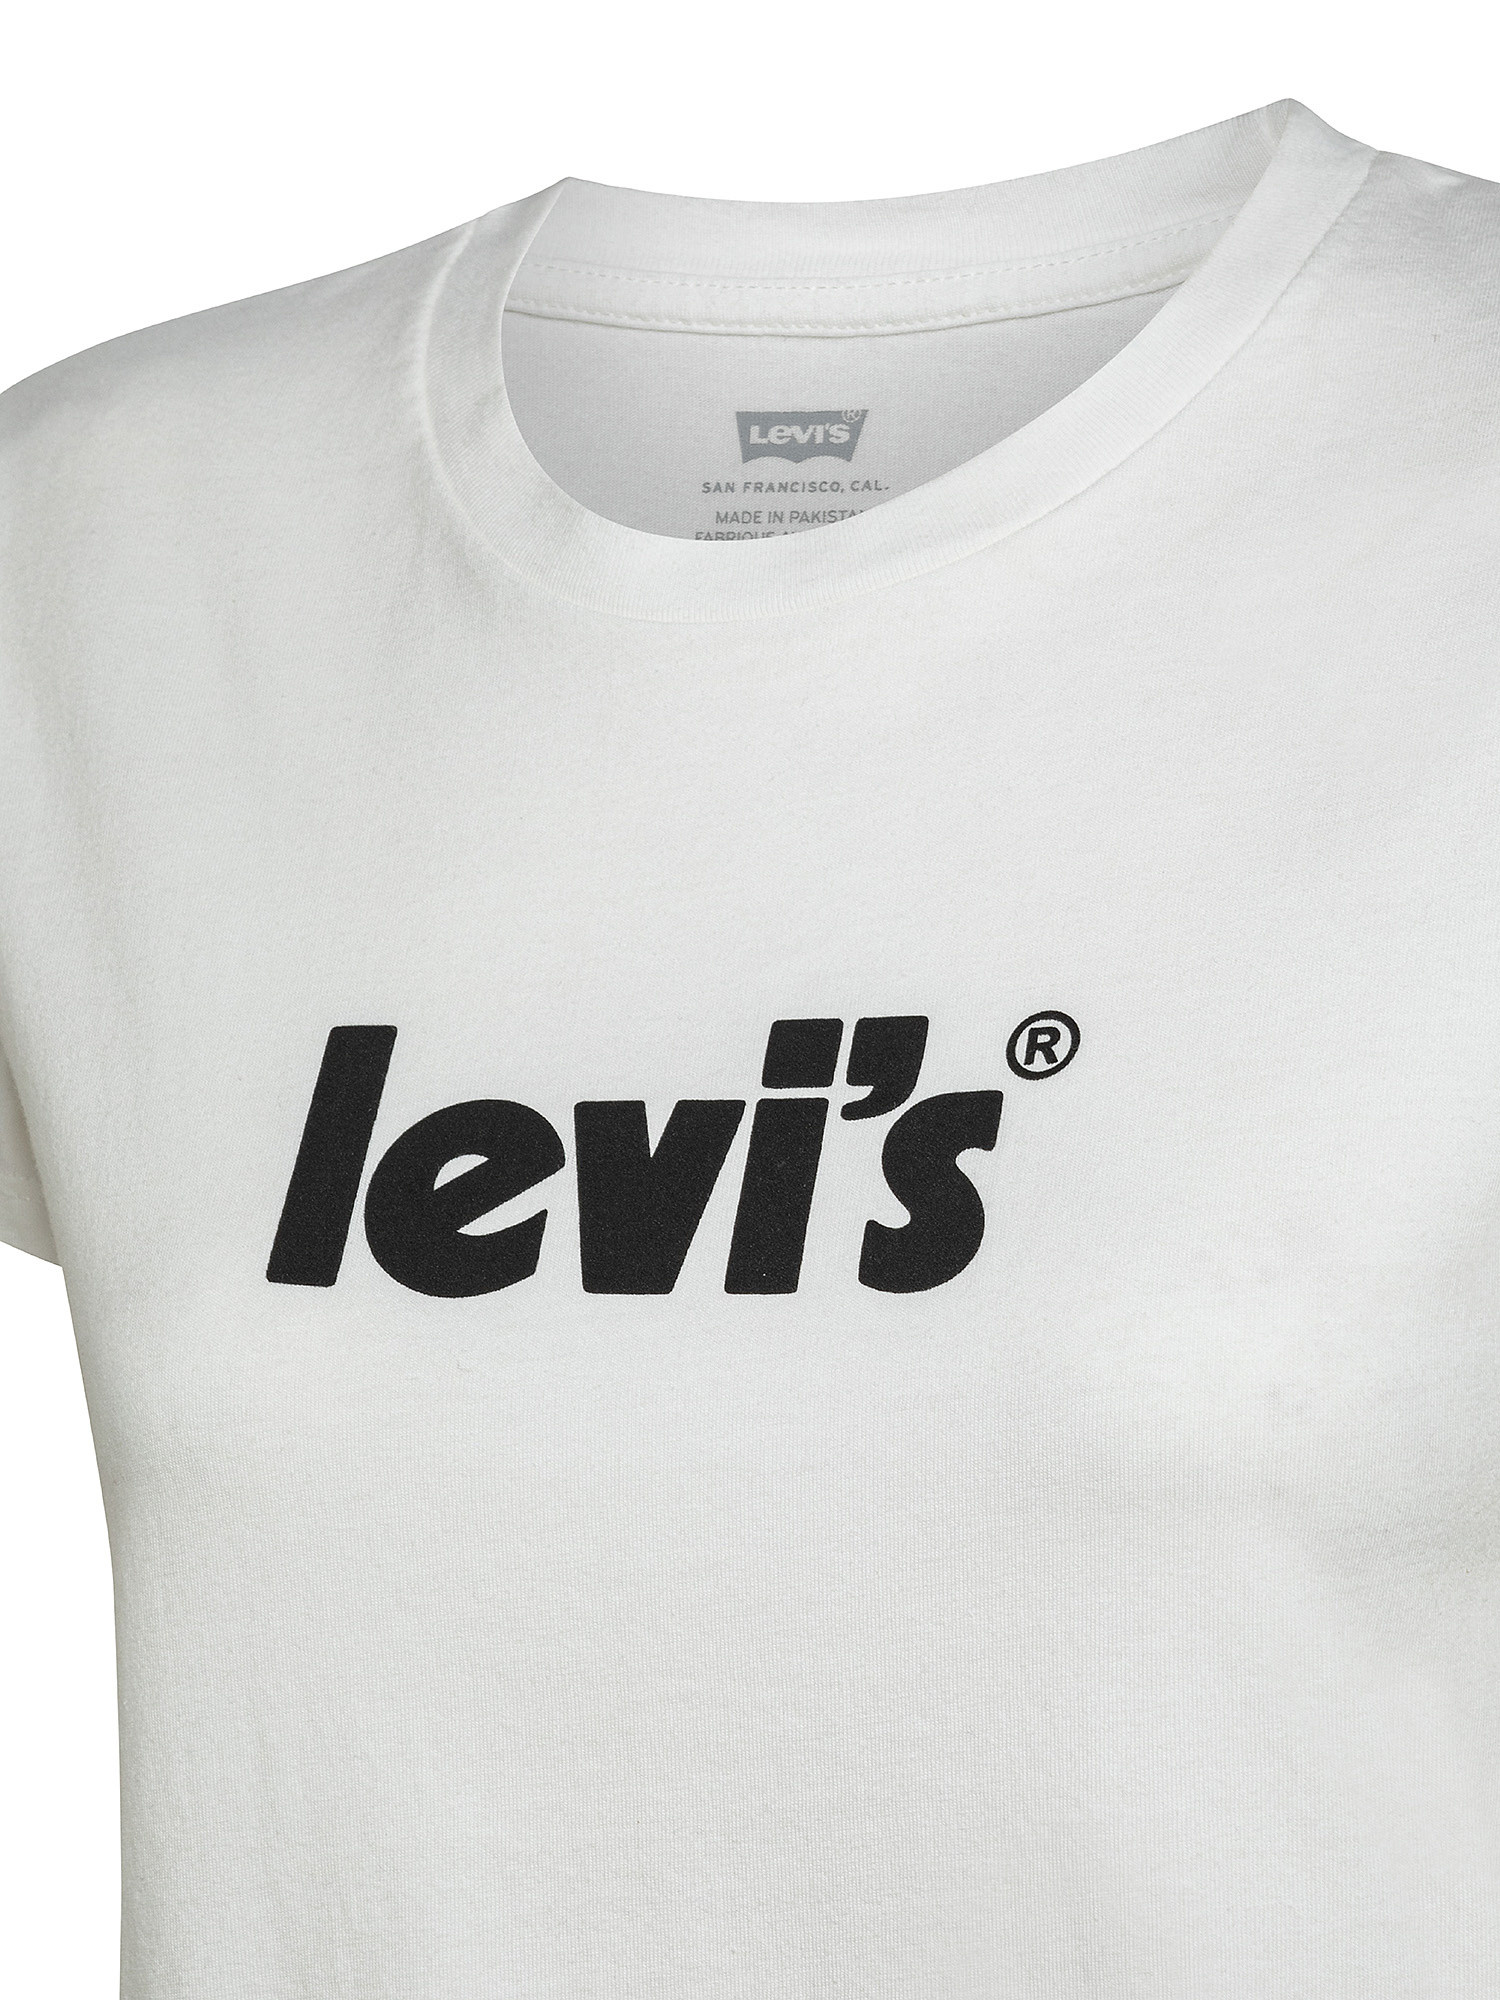 Perfect Tee, White, large image number 2